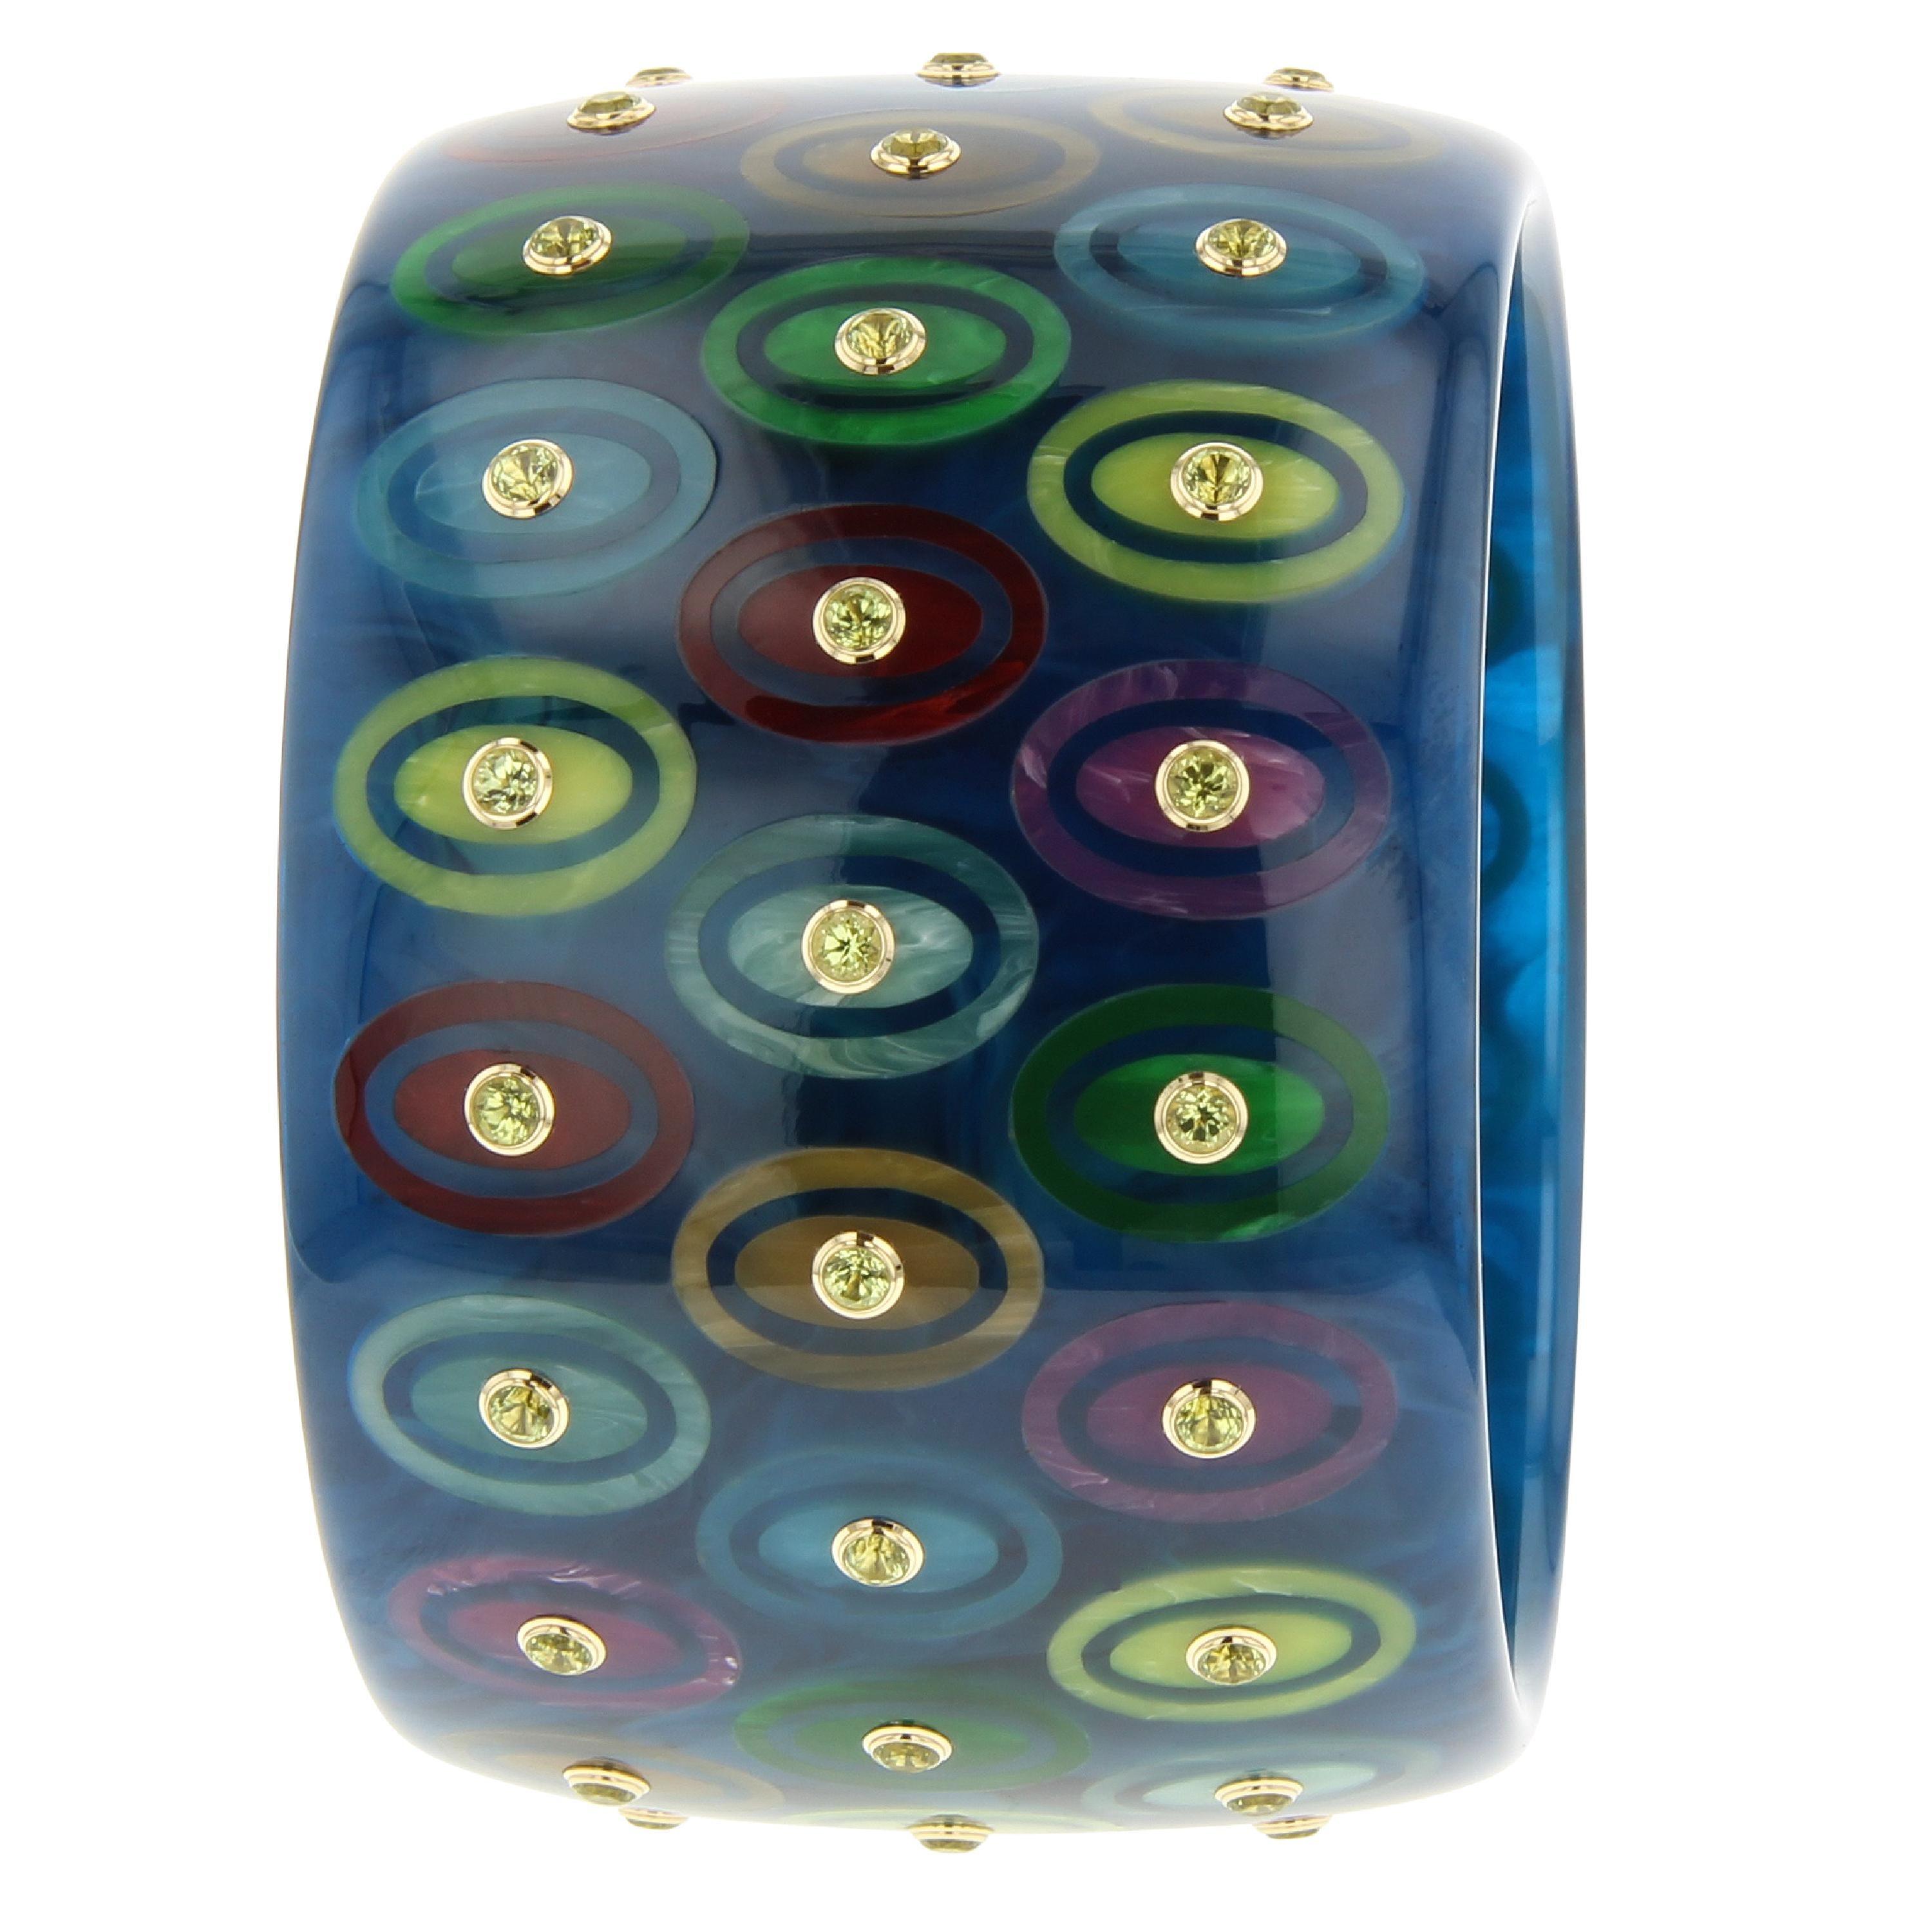 This unique and beautiful Mark Davis bangle was created from vintage, navy blue bakelite that has been expertly inlaid with ovals of various colored vintage bakelite. The ovals sections are further surrounded by an oval frame in the same color